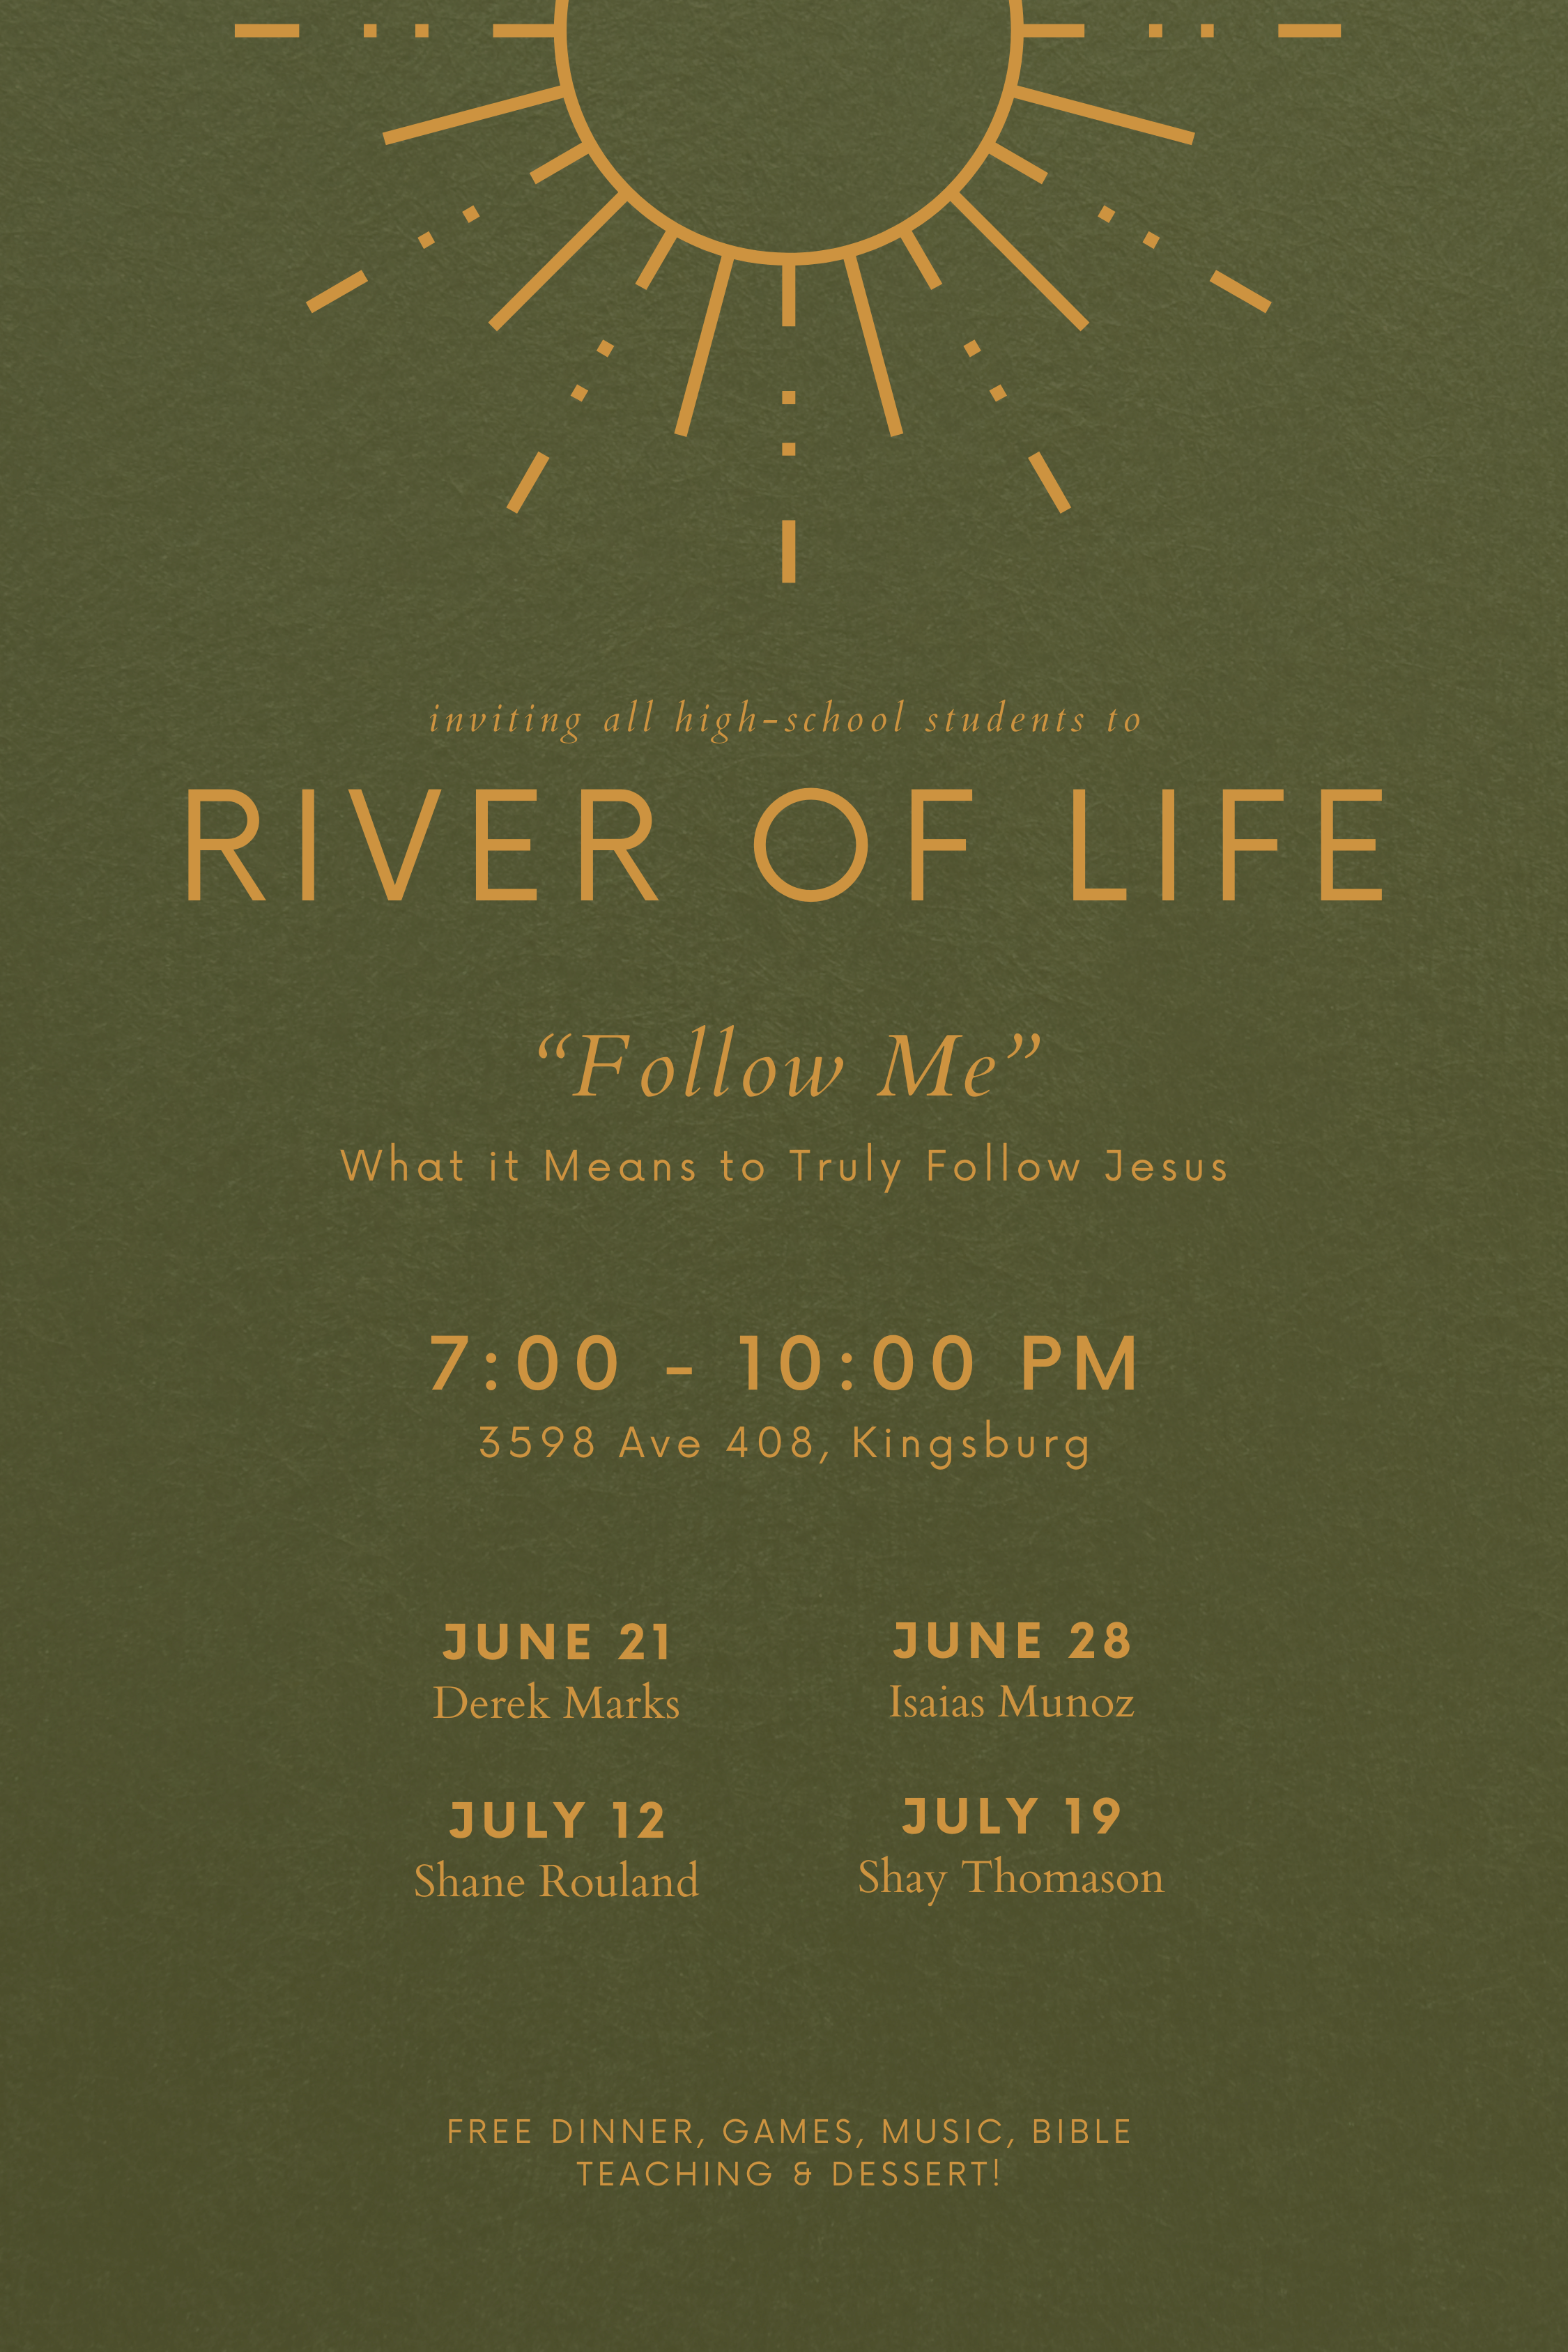 River of Life Postcard - 4 x 6 in